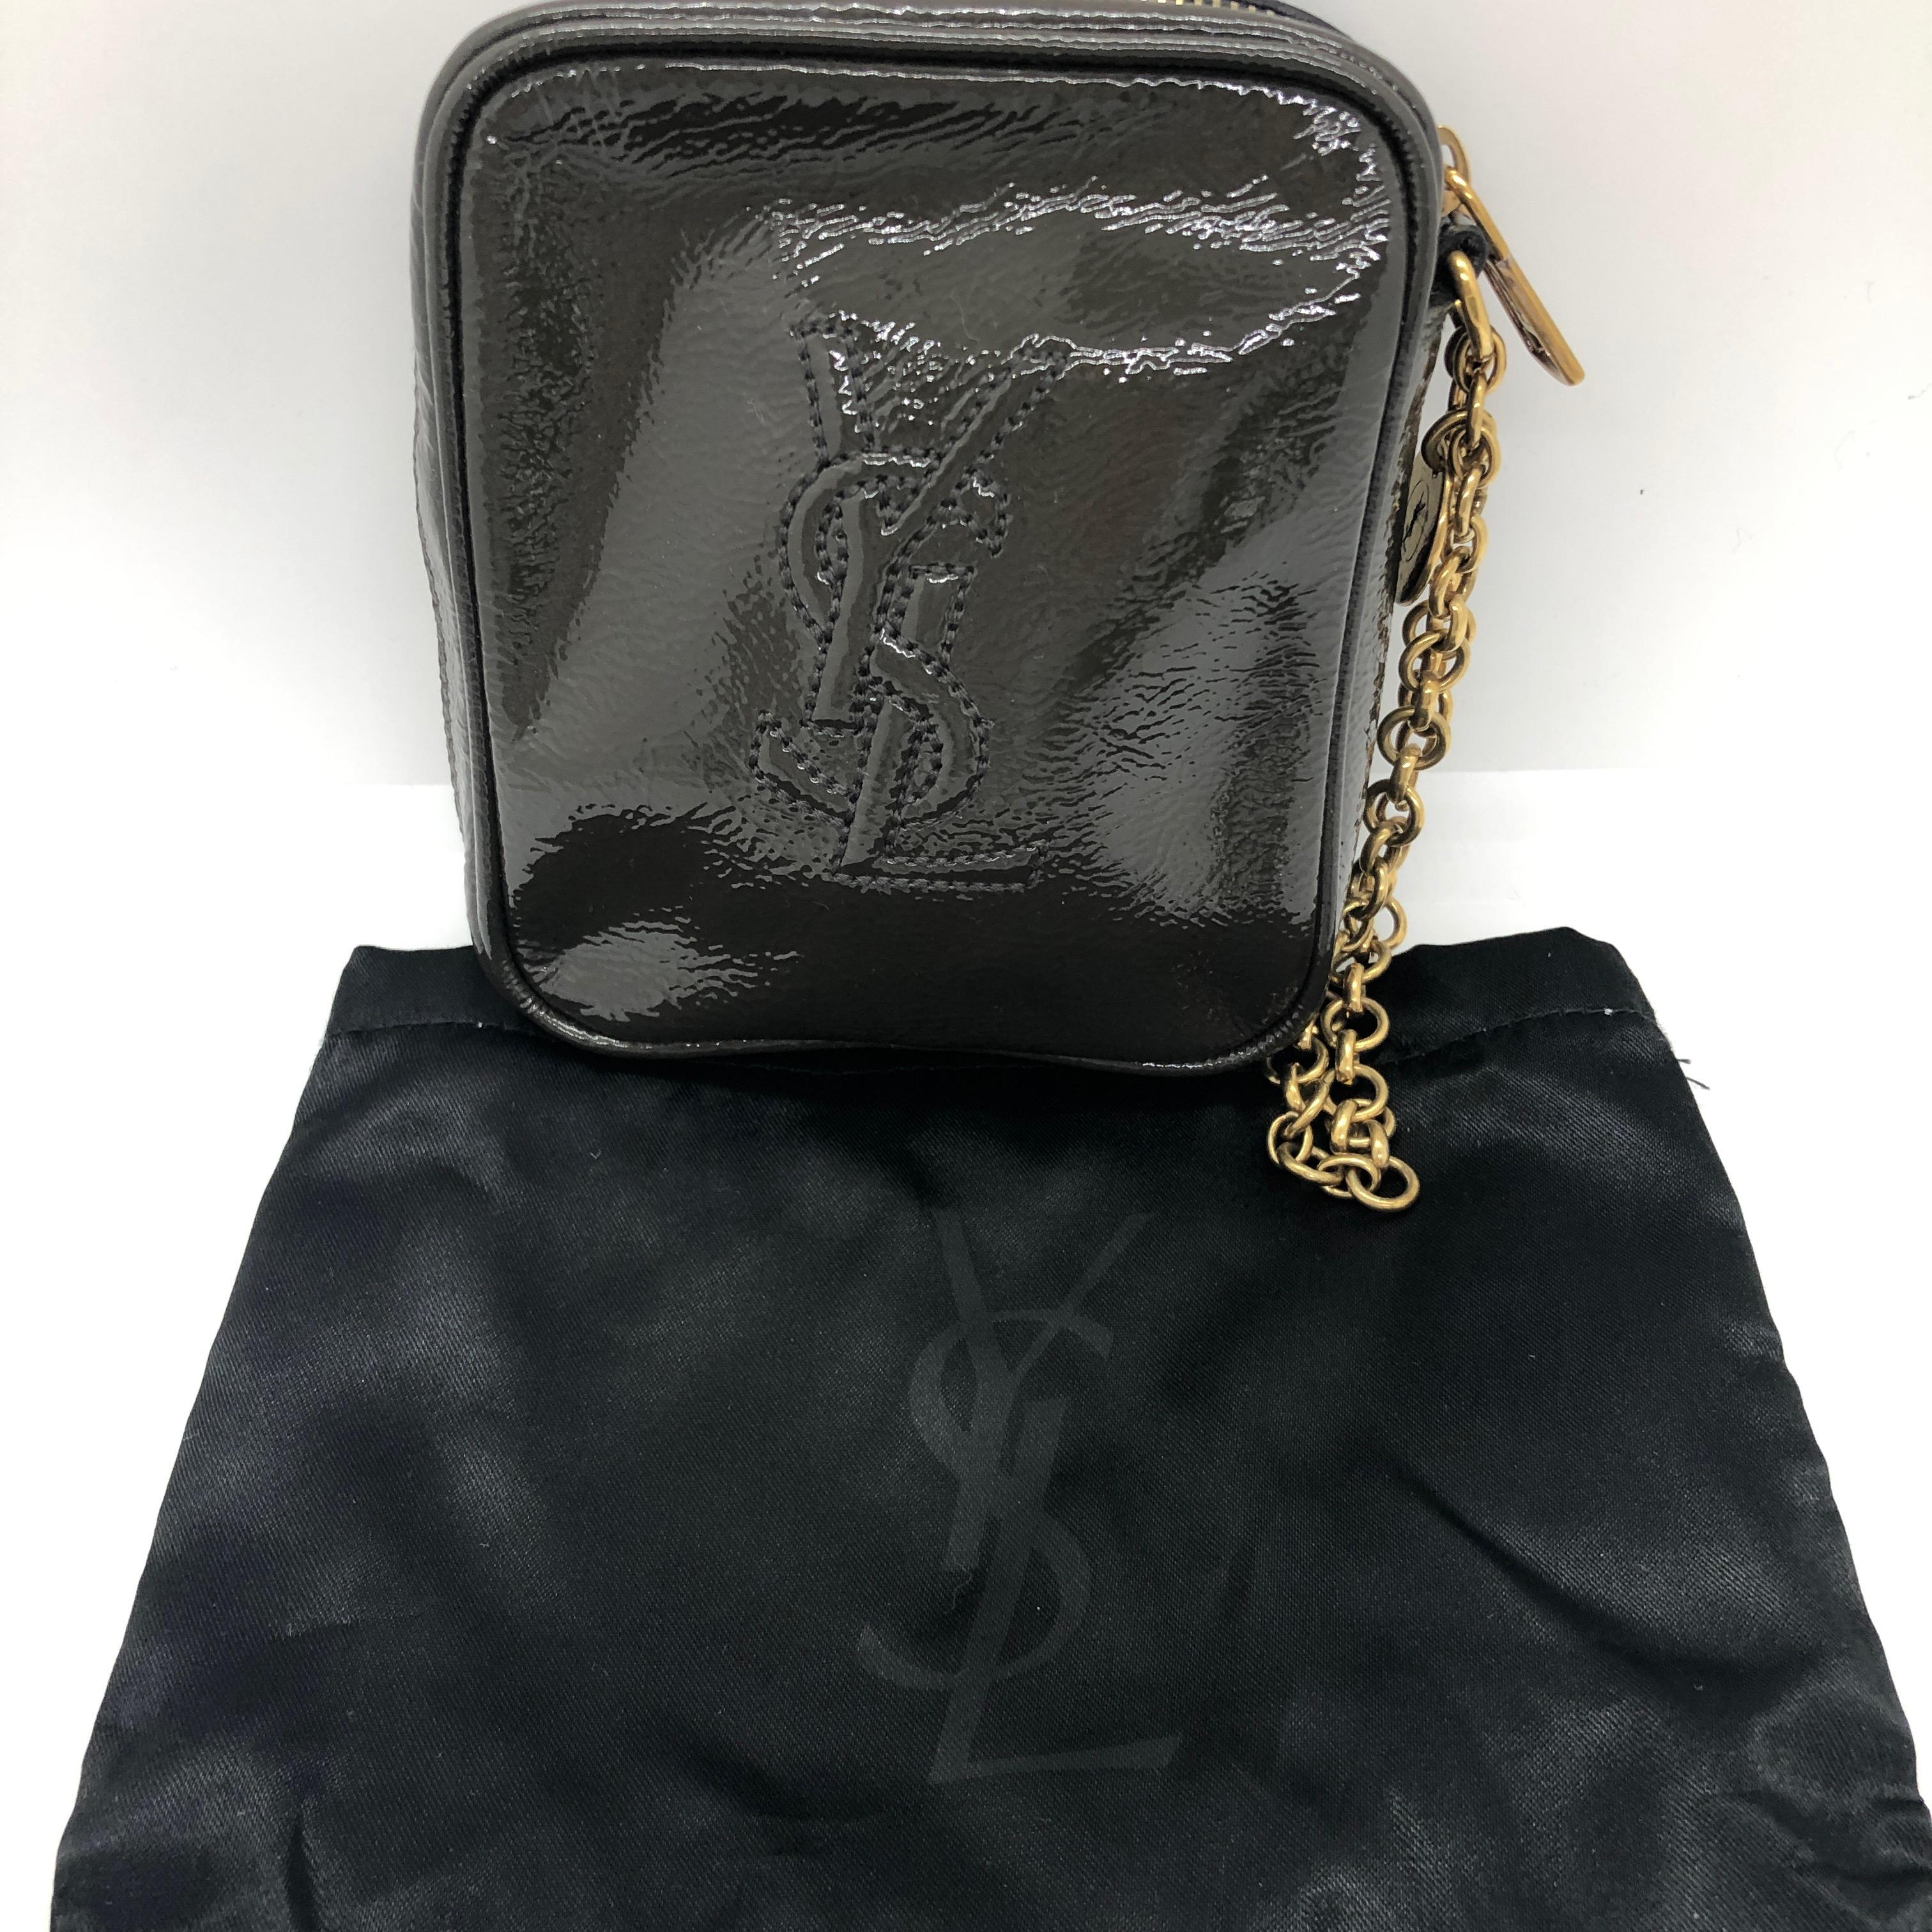 YSL Monogram Gray Patent Leather Wristlet w/ Gold Metal Chain and Hardware For Sale 8